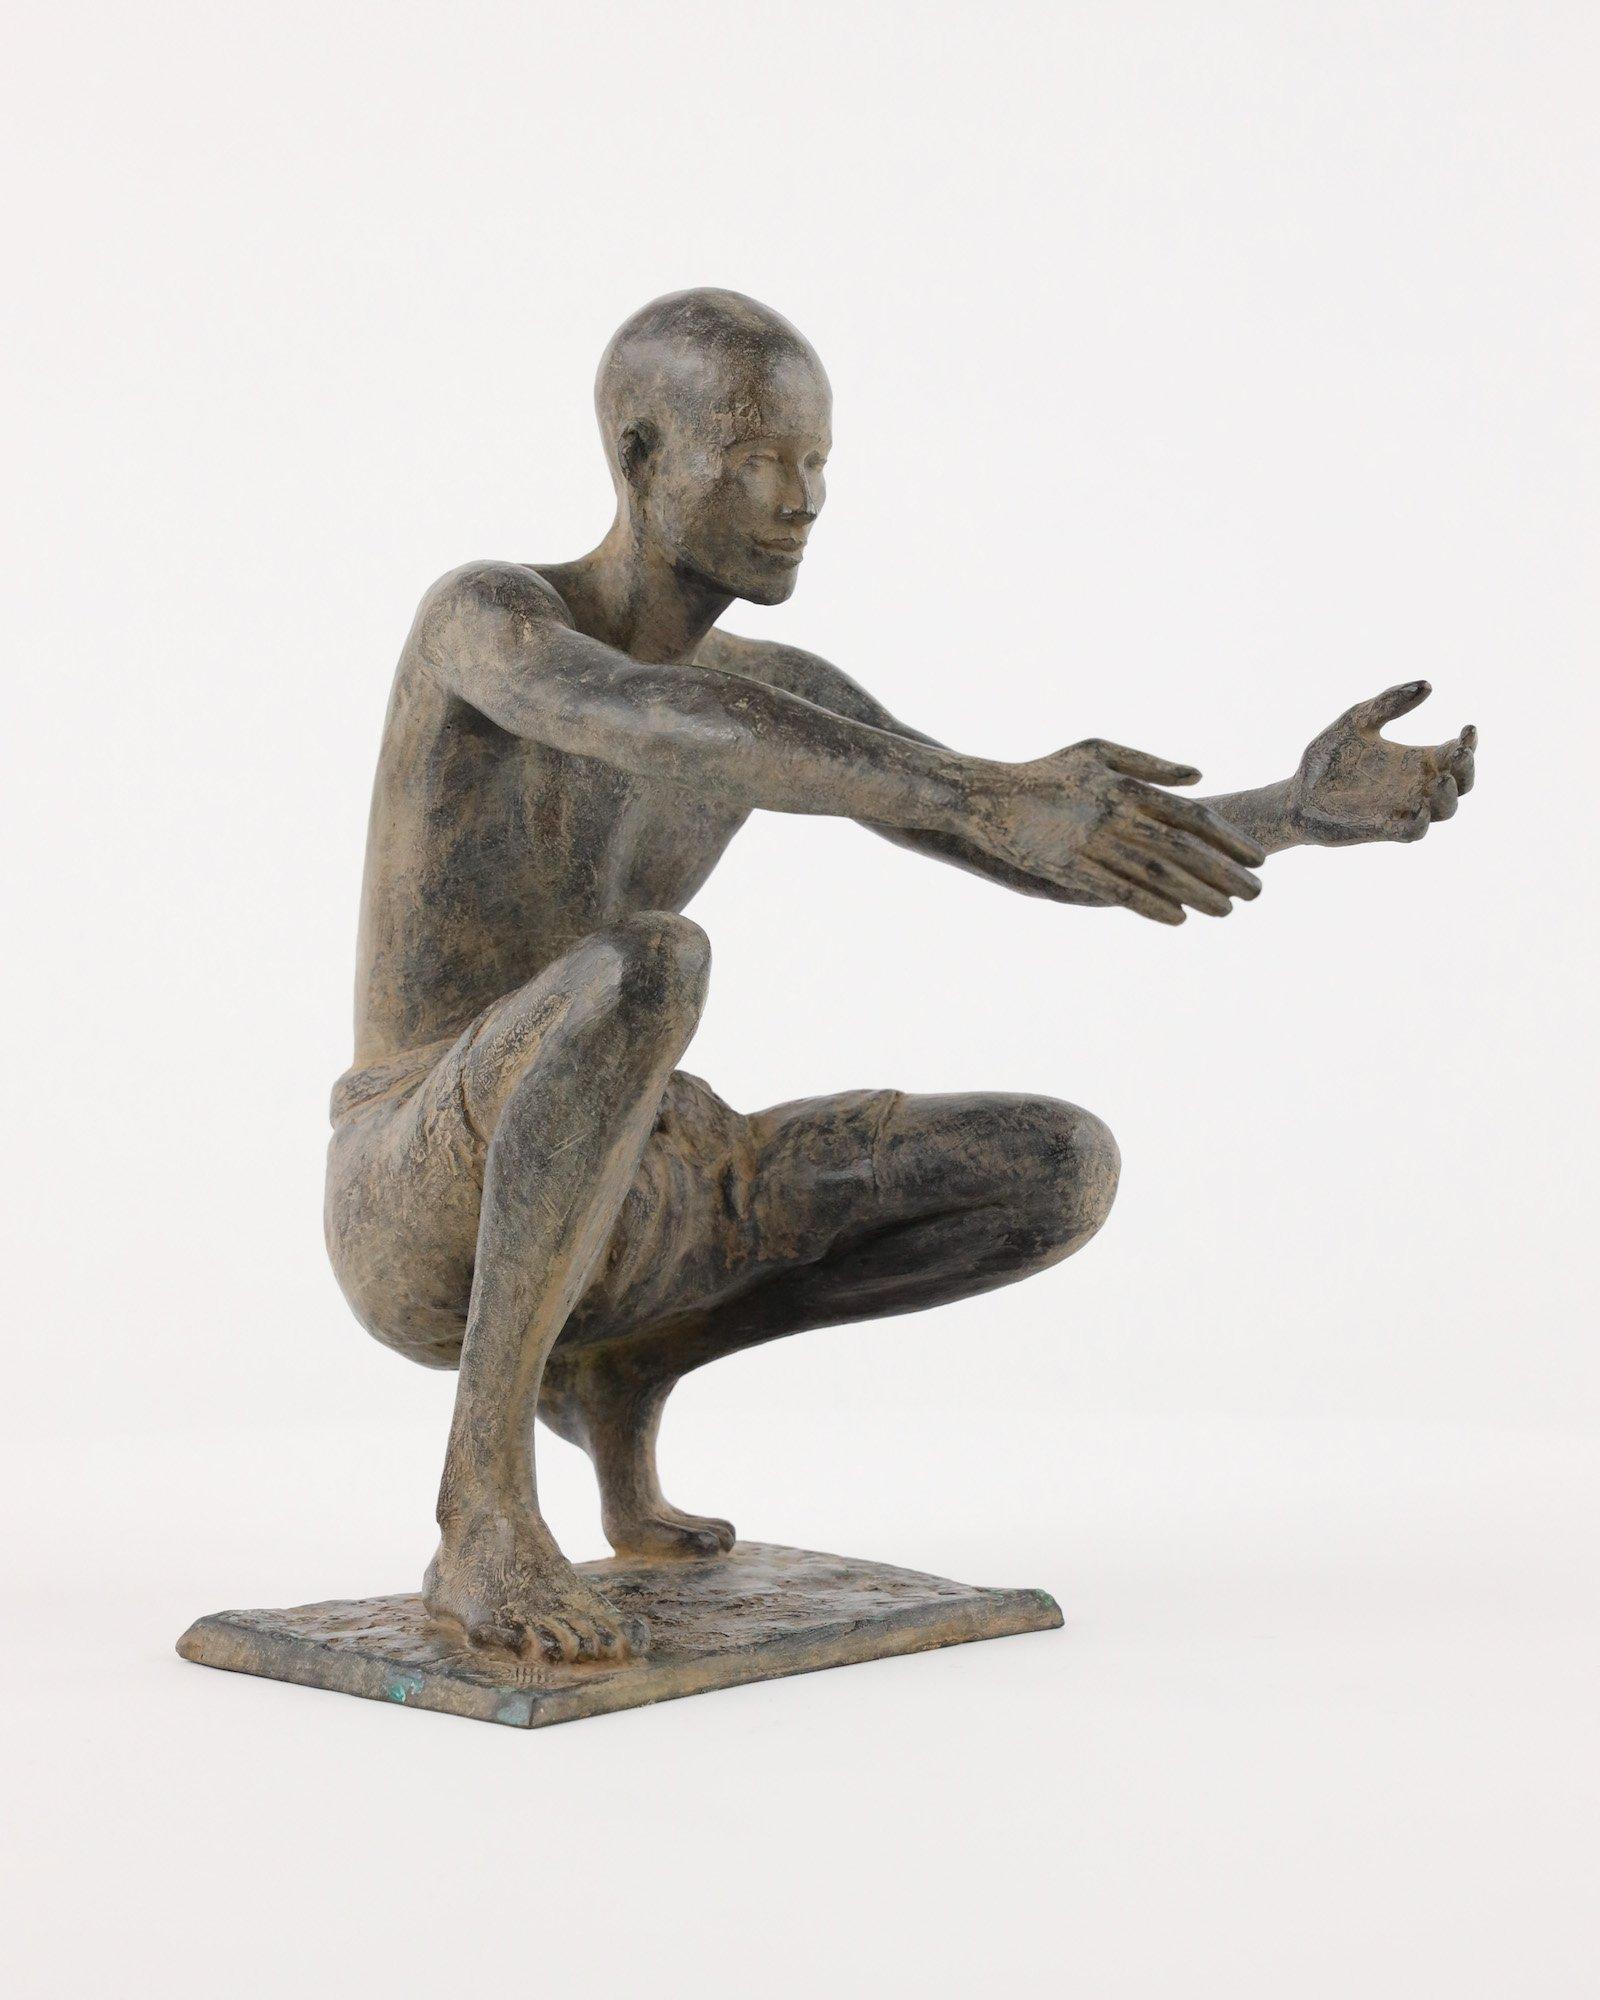 The Welcome is a bronze sculpture by French contemporary artist Marine de Soos, dimensions are 31 × 28 × 20 cm (12.2 × 11 × 7.9 in). 
The sculpture is signed and numbered, it is part of a limited edition of 8 editions + 4 artist’s proofs, and comes